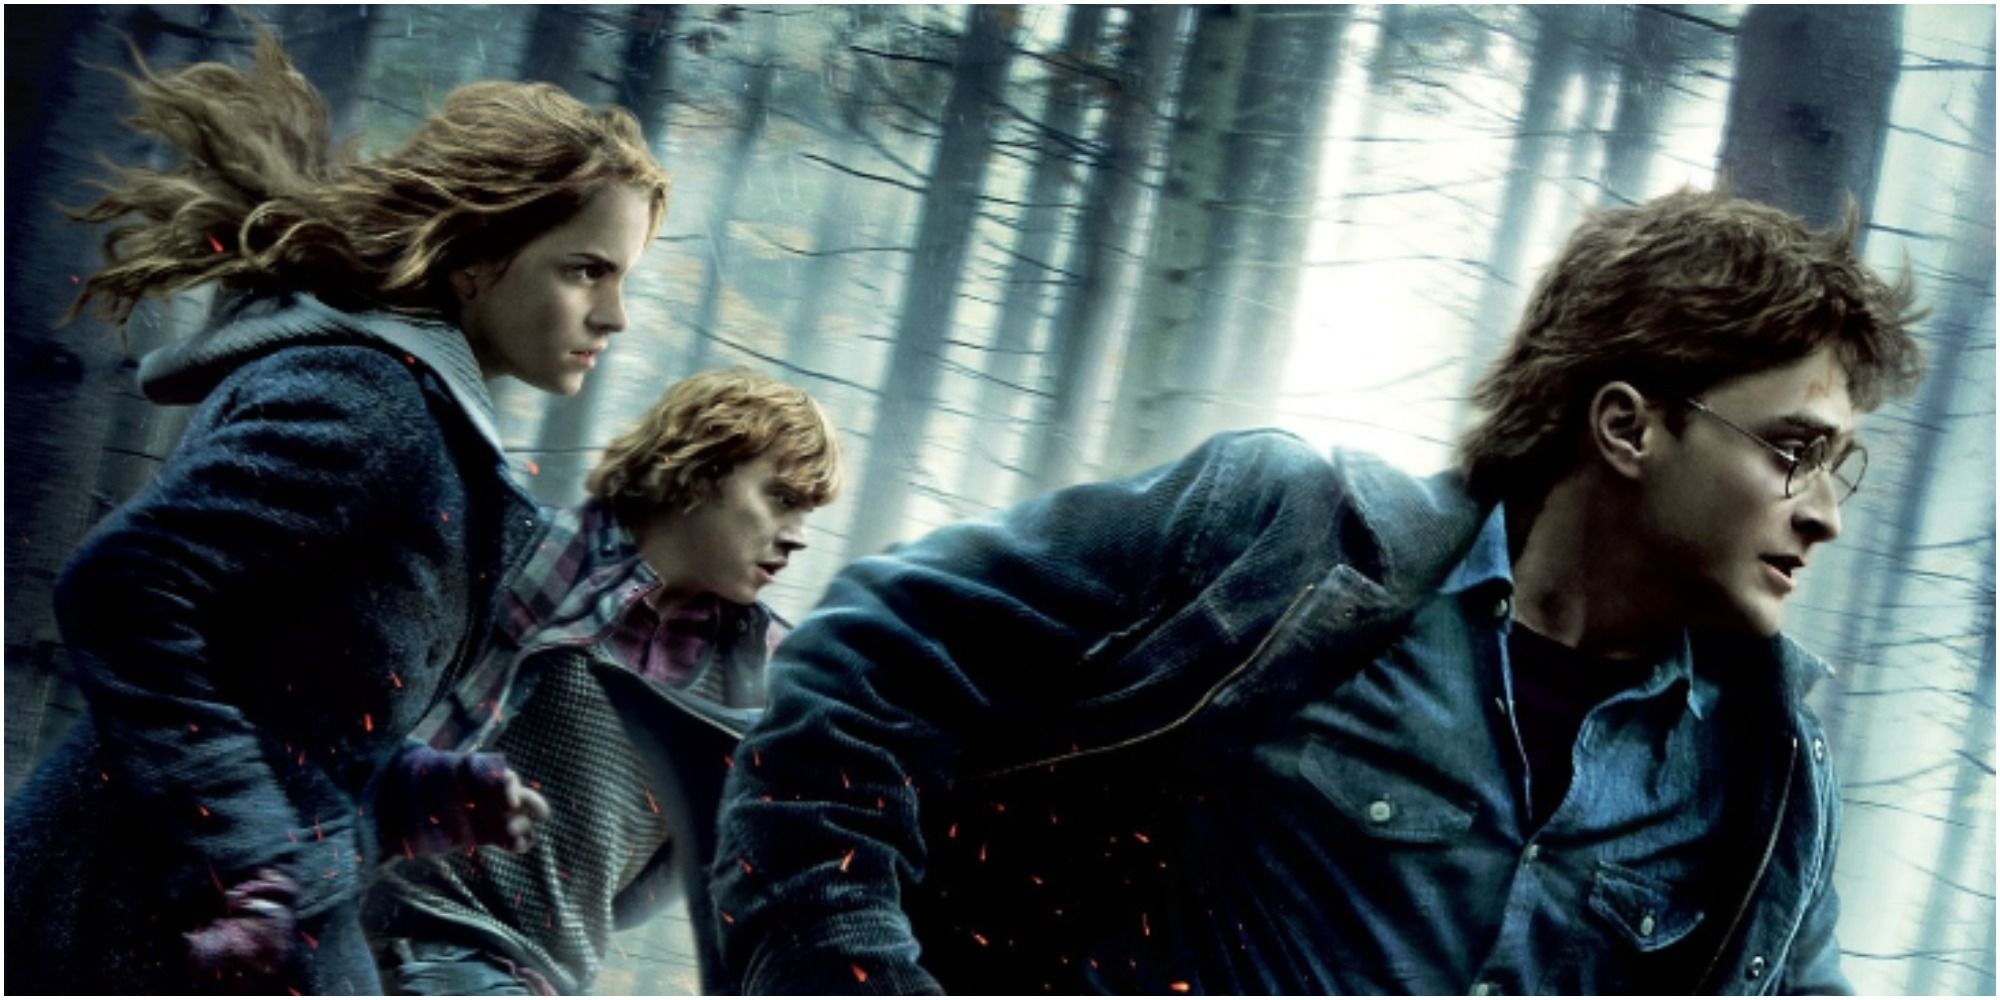 Danielle Radcliffe, Emma Watson and Rupert Grint running through the forest in the Harry Potter and the Deathly Hallows Part I promo poster